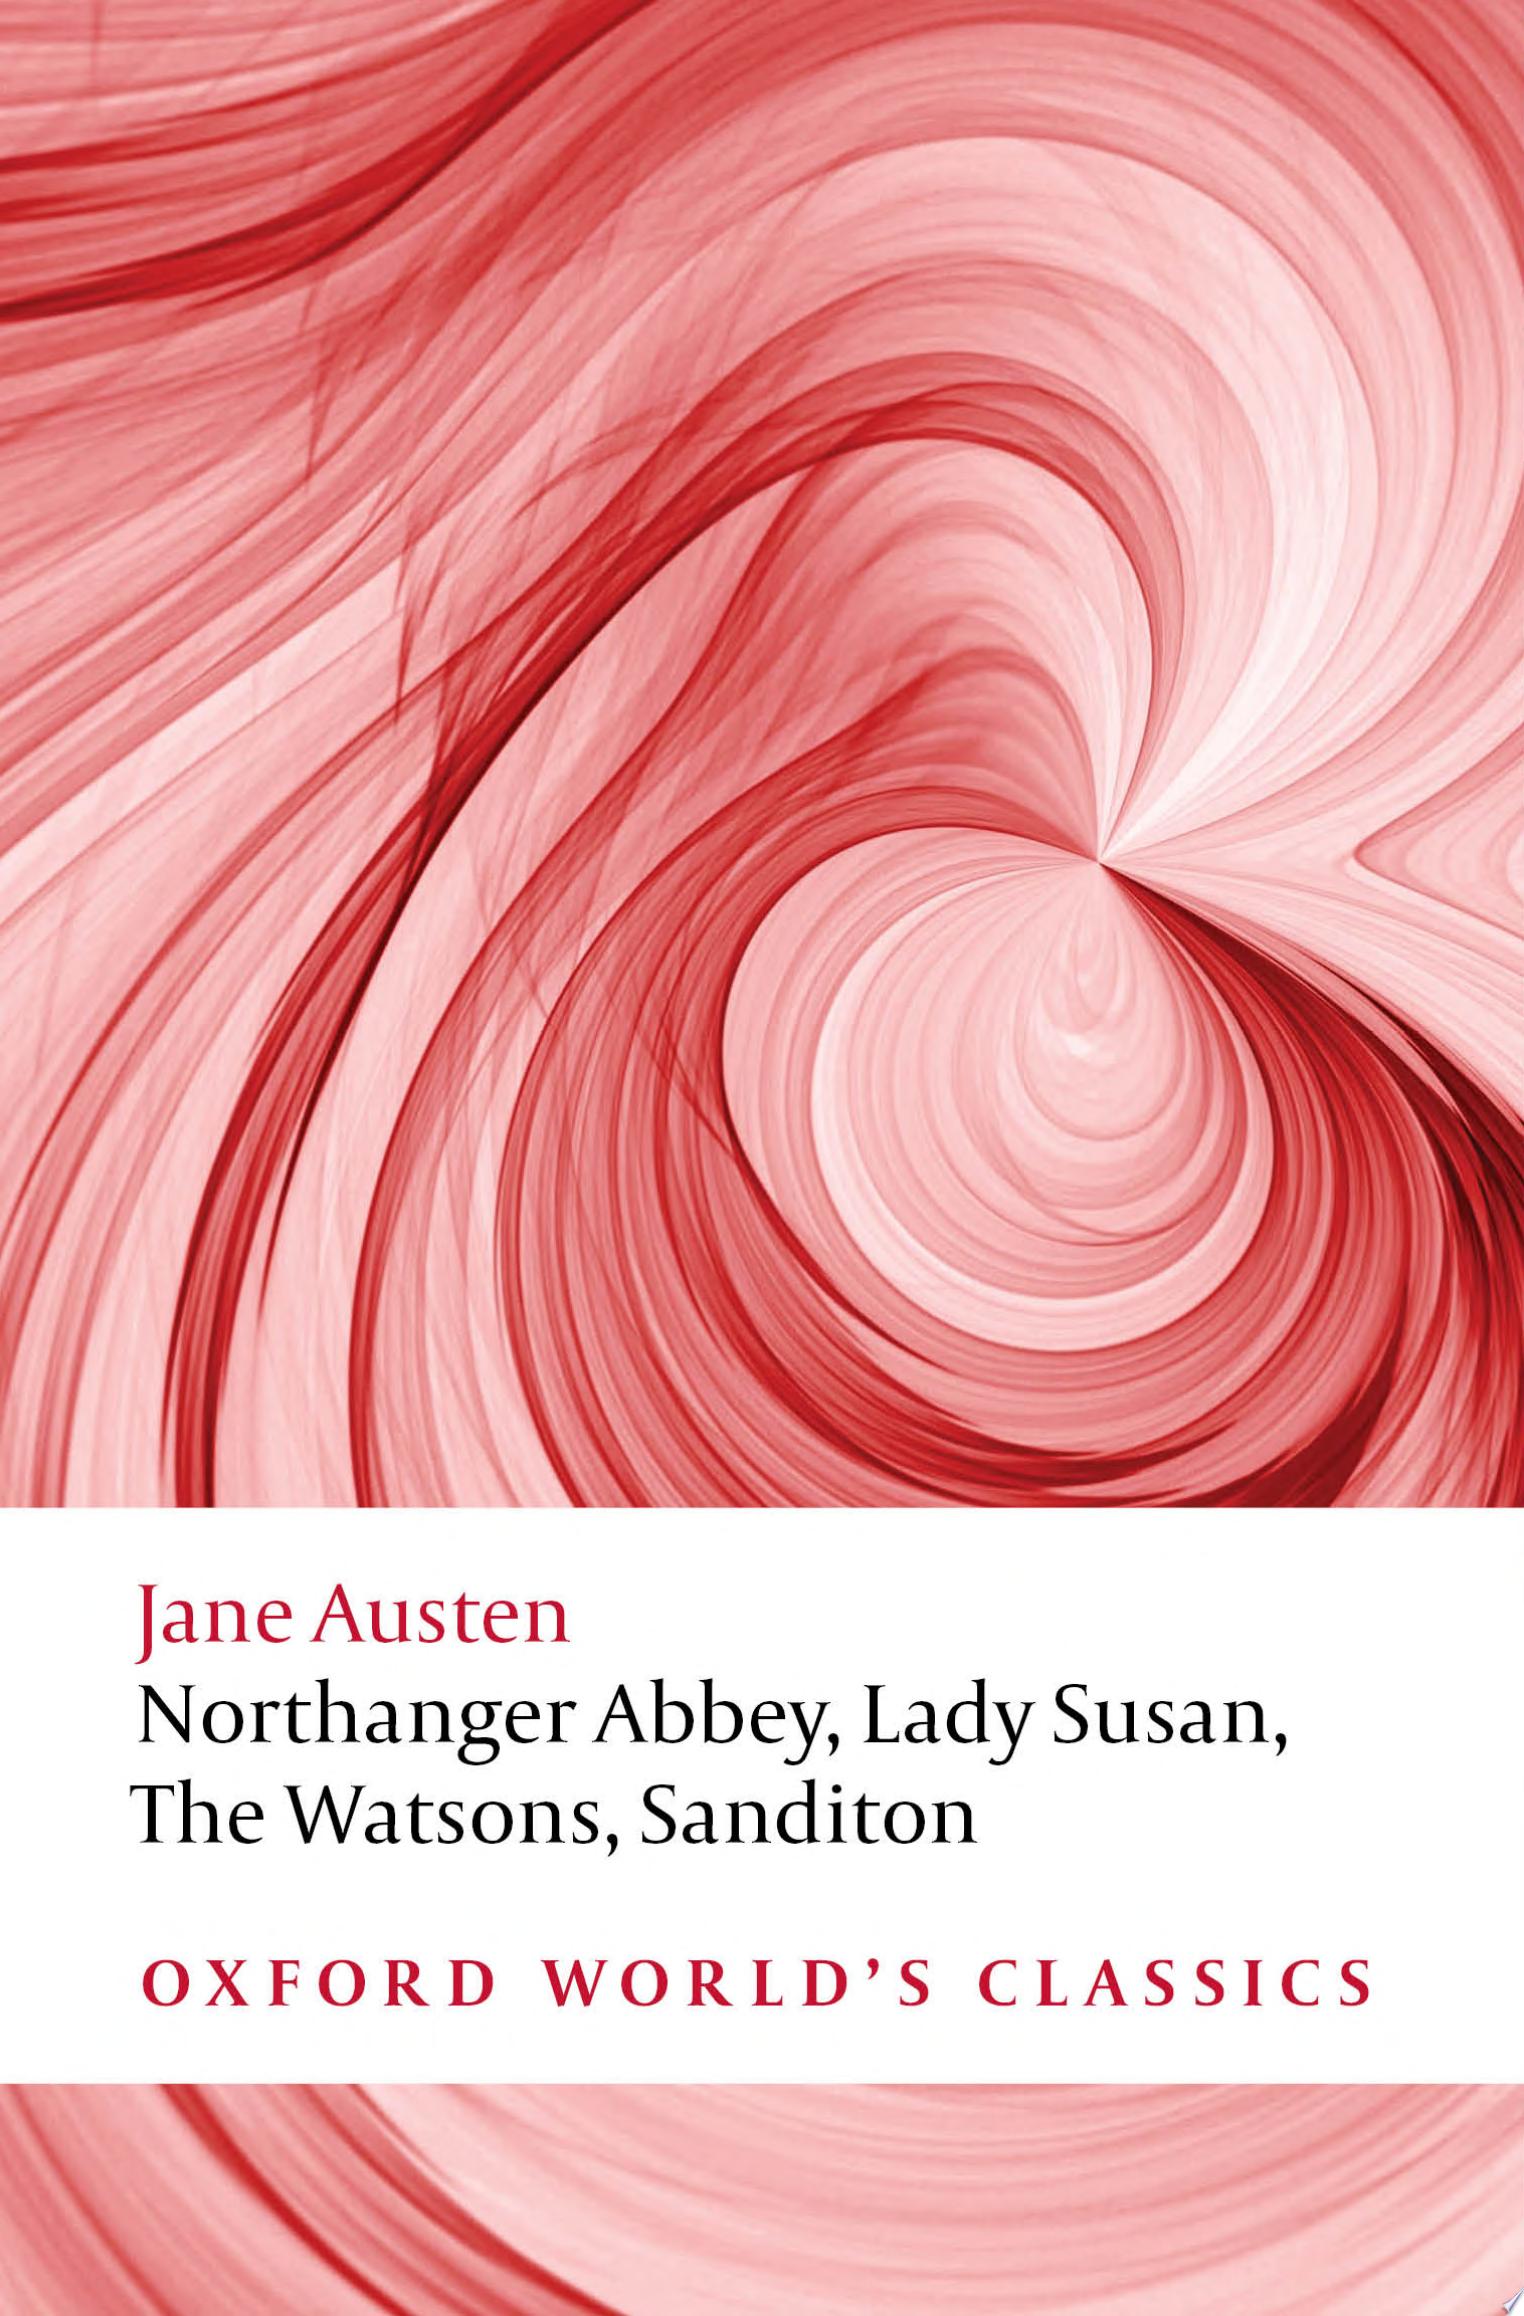 Image for "Northanger Abbey, Lady Susan, The Watsons, Sanditon"